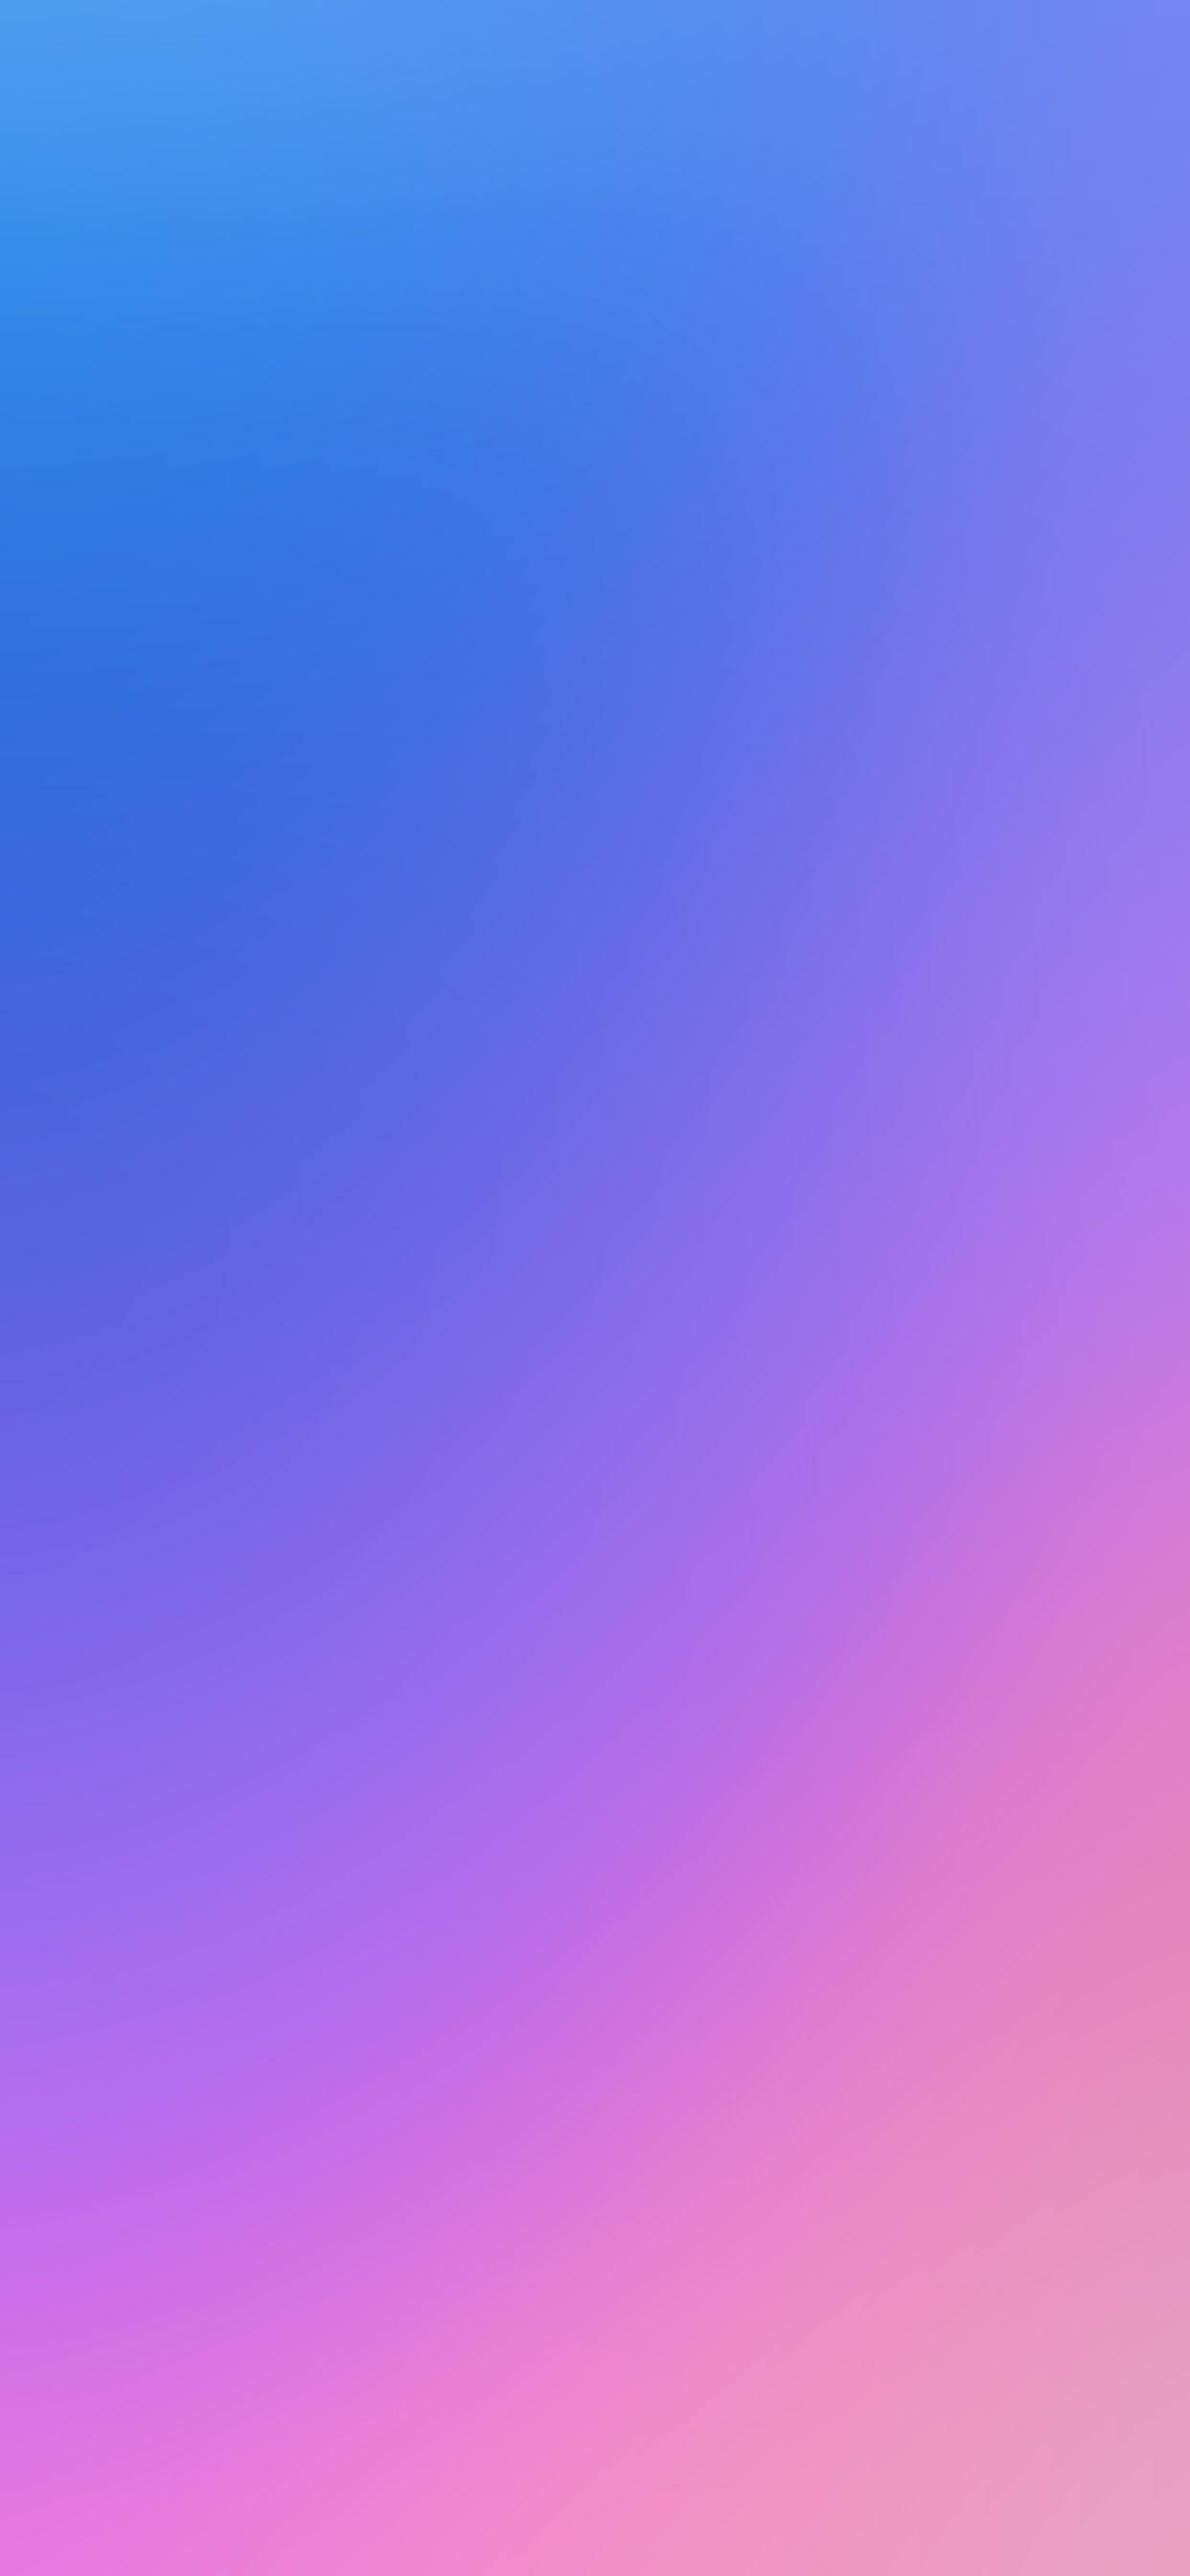 A Pastel Colored Gradient  Free Stock Photo